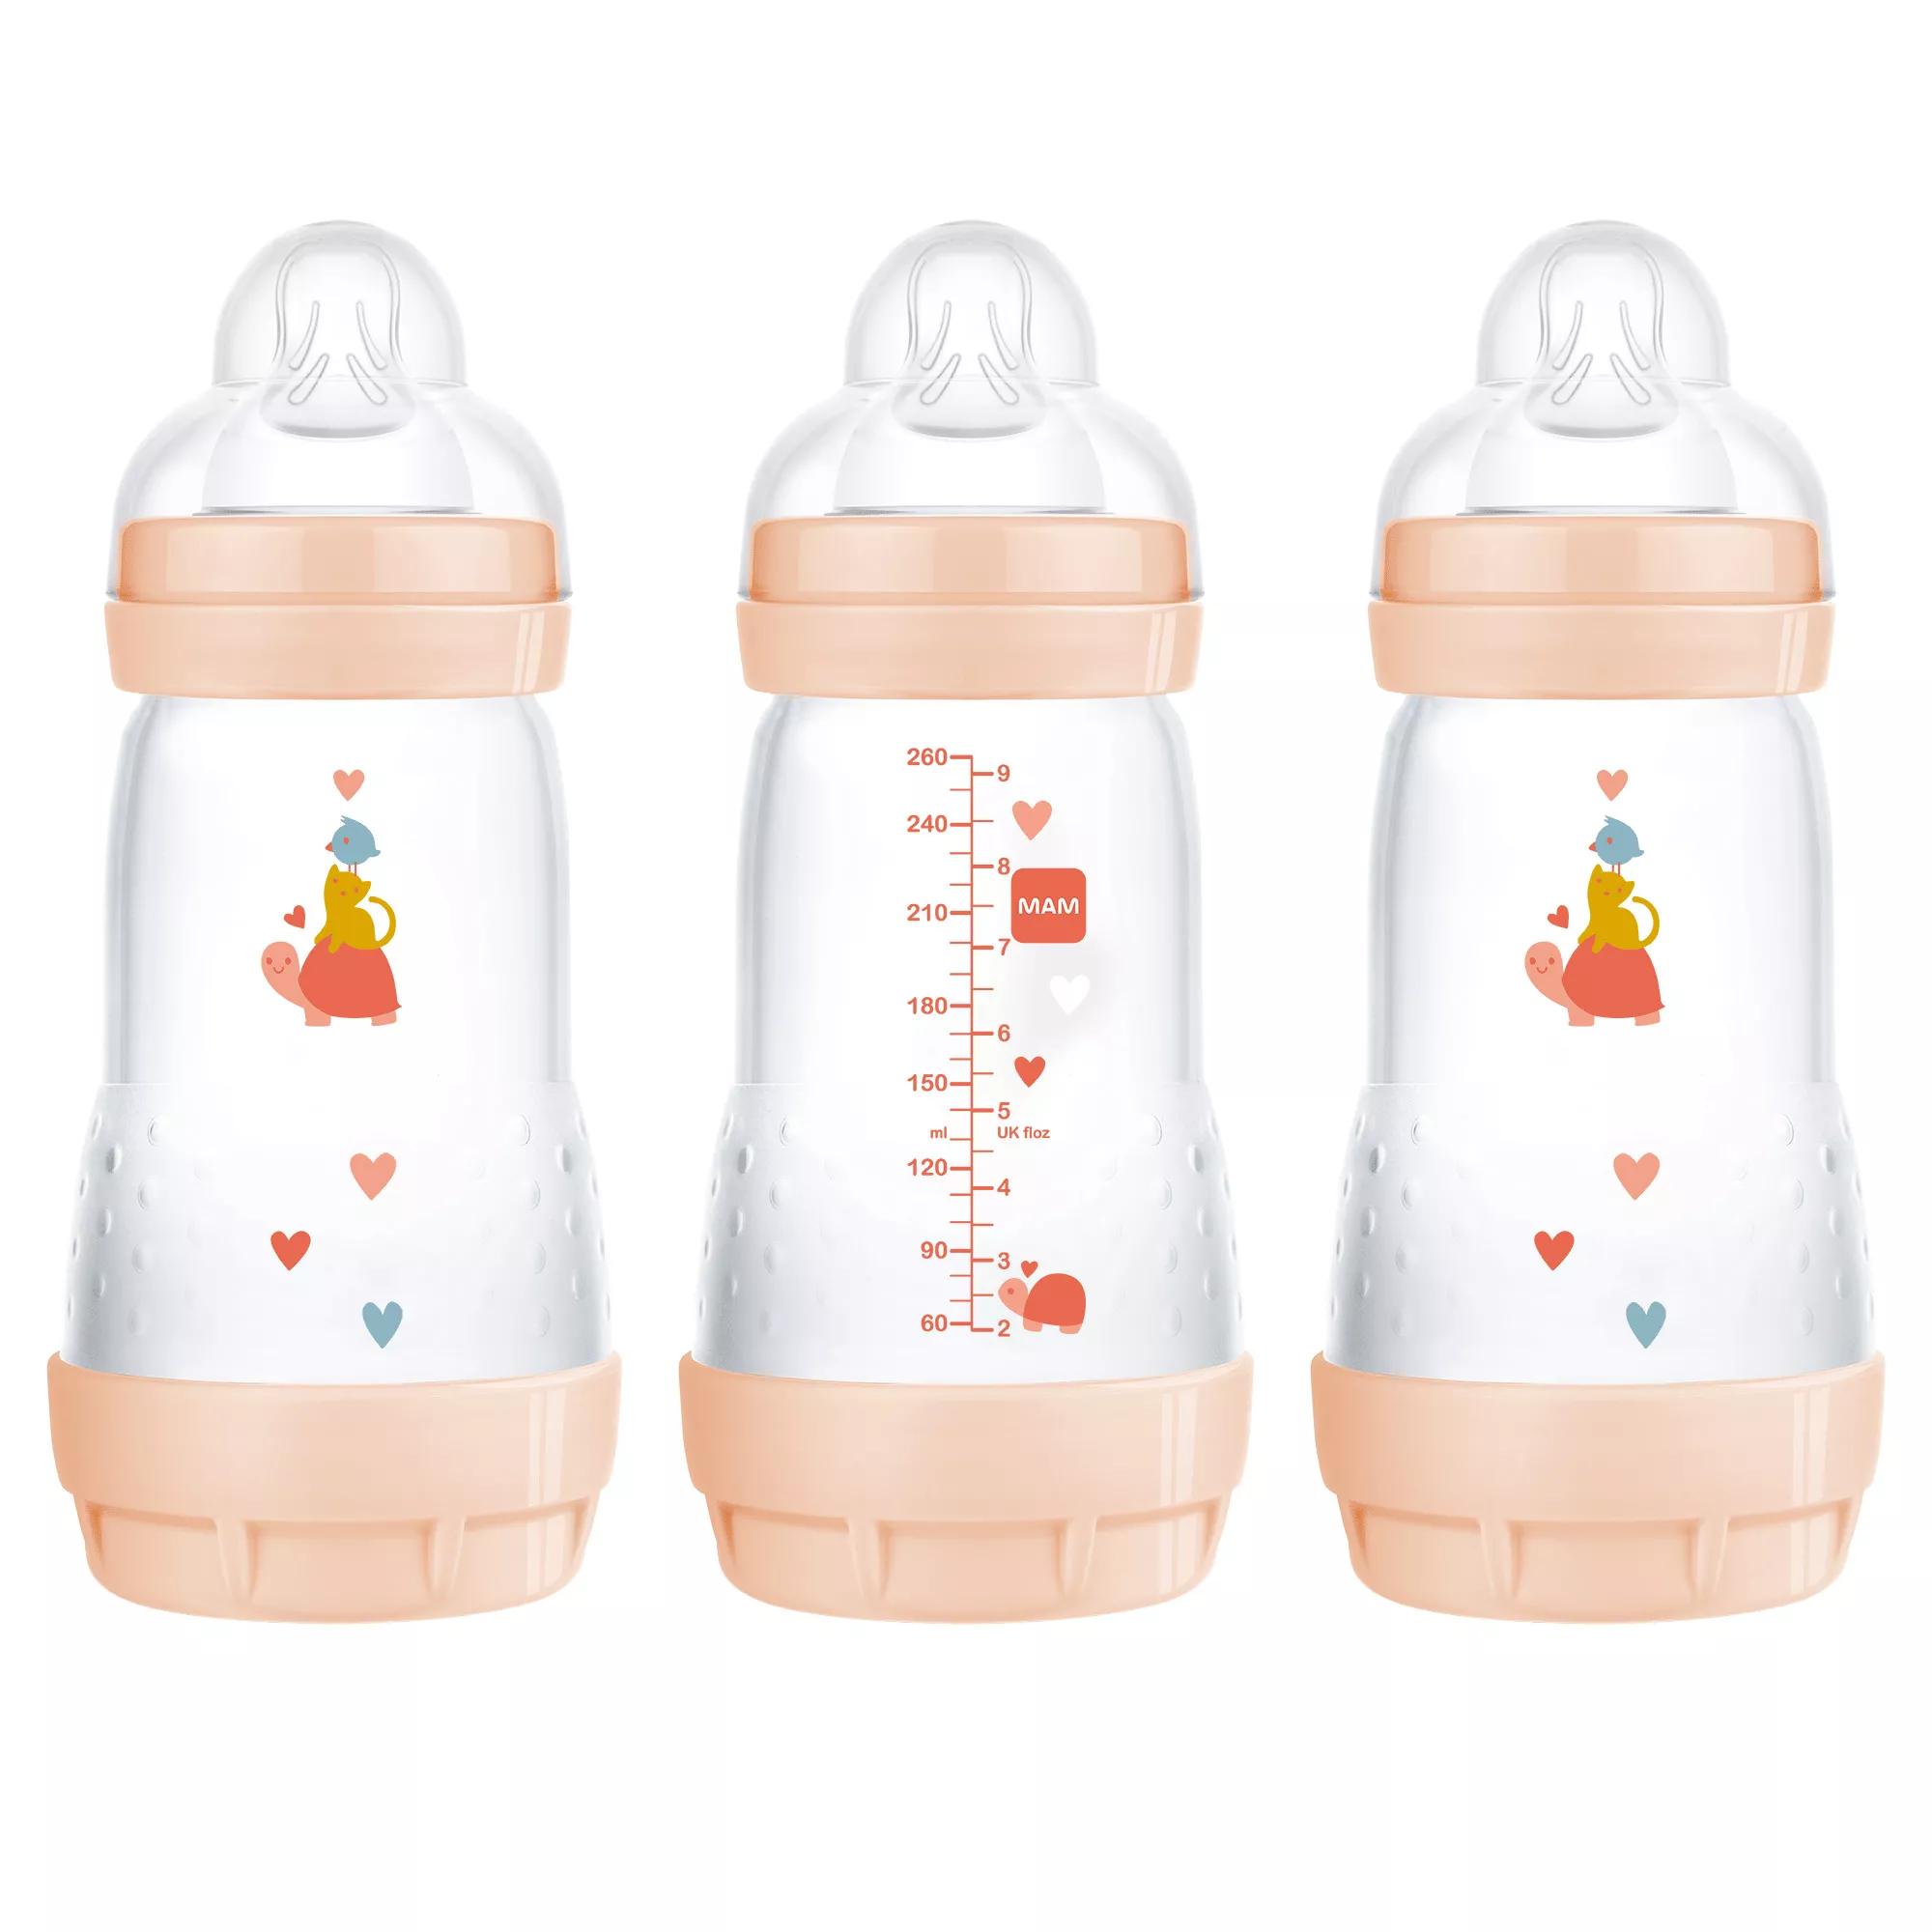 Baby Bottle Reviews on weeSpring